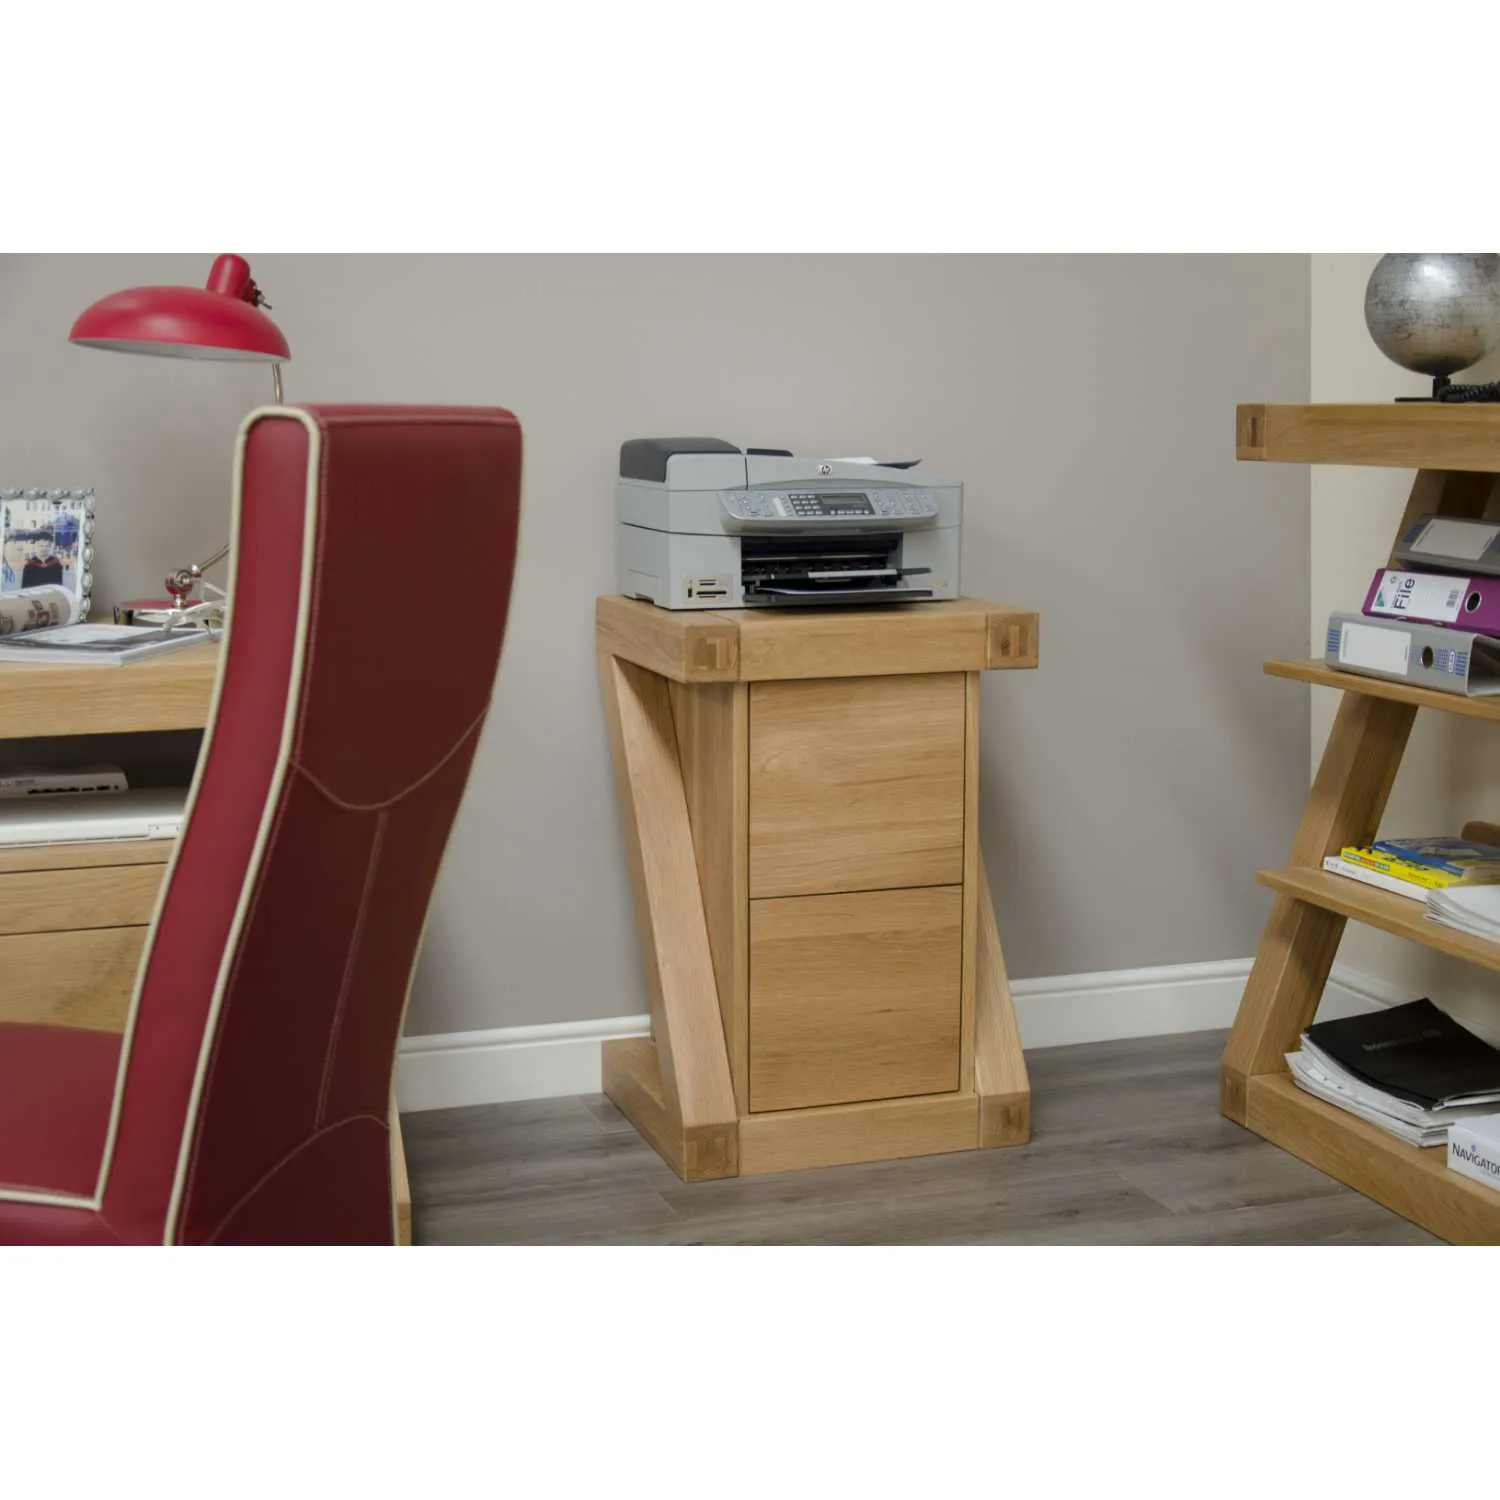 Z Shape Oak Filing Cabinet With 2 Drawers Home Office Study Storage Unit